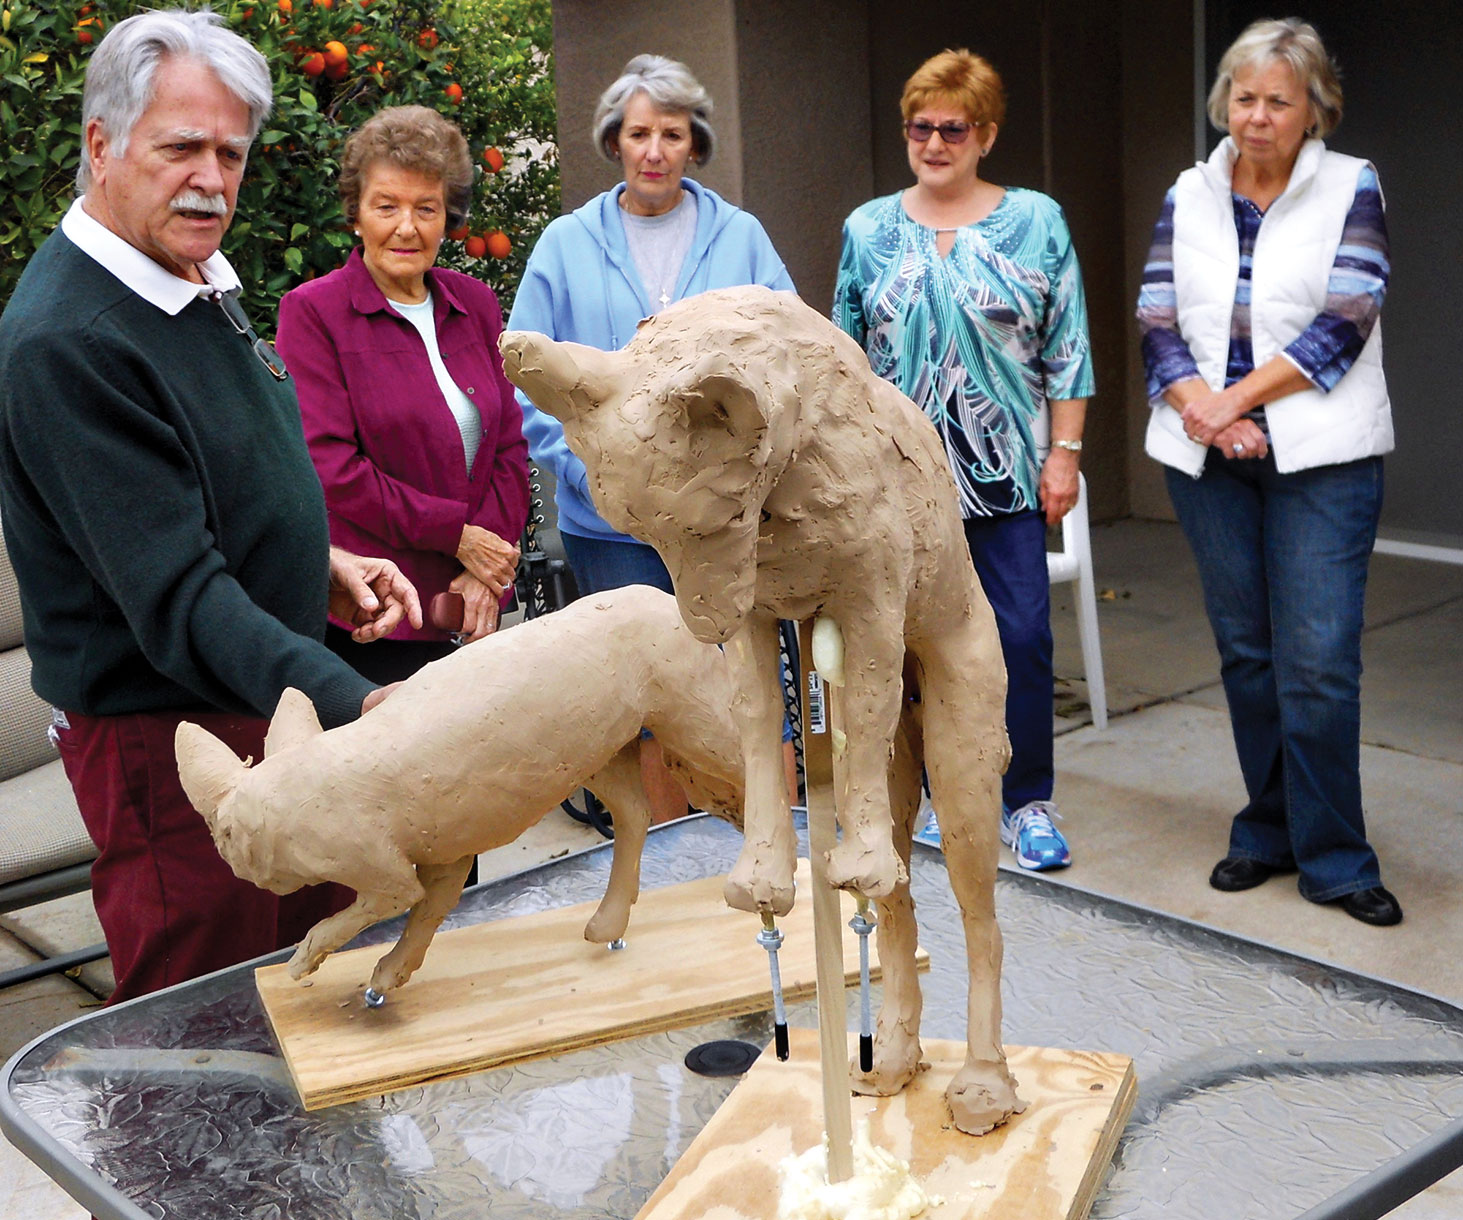 SunBird resident and professional sculptor Art Norby discusses the process of creating a bronze statue with members of the Lapidary Club.